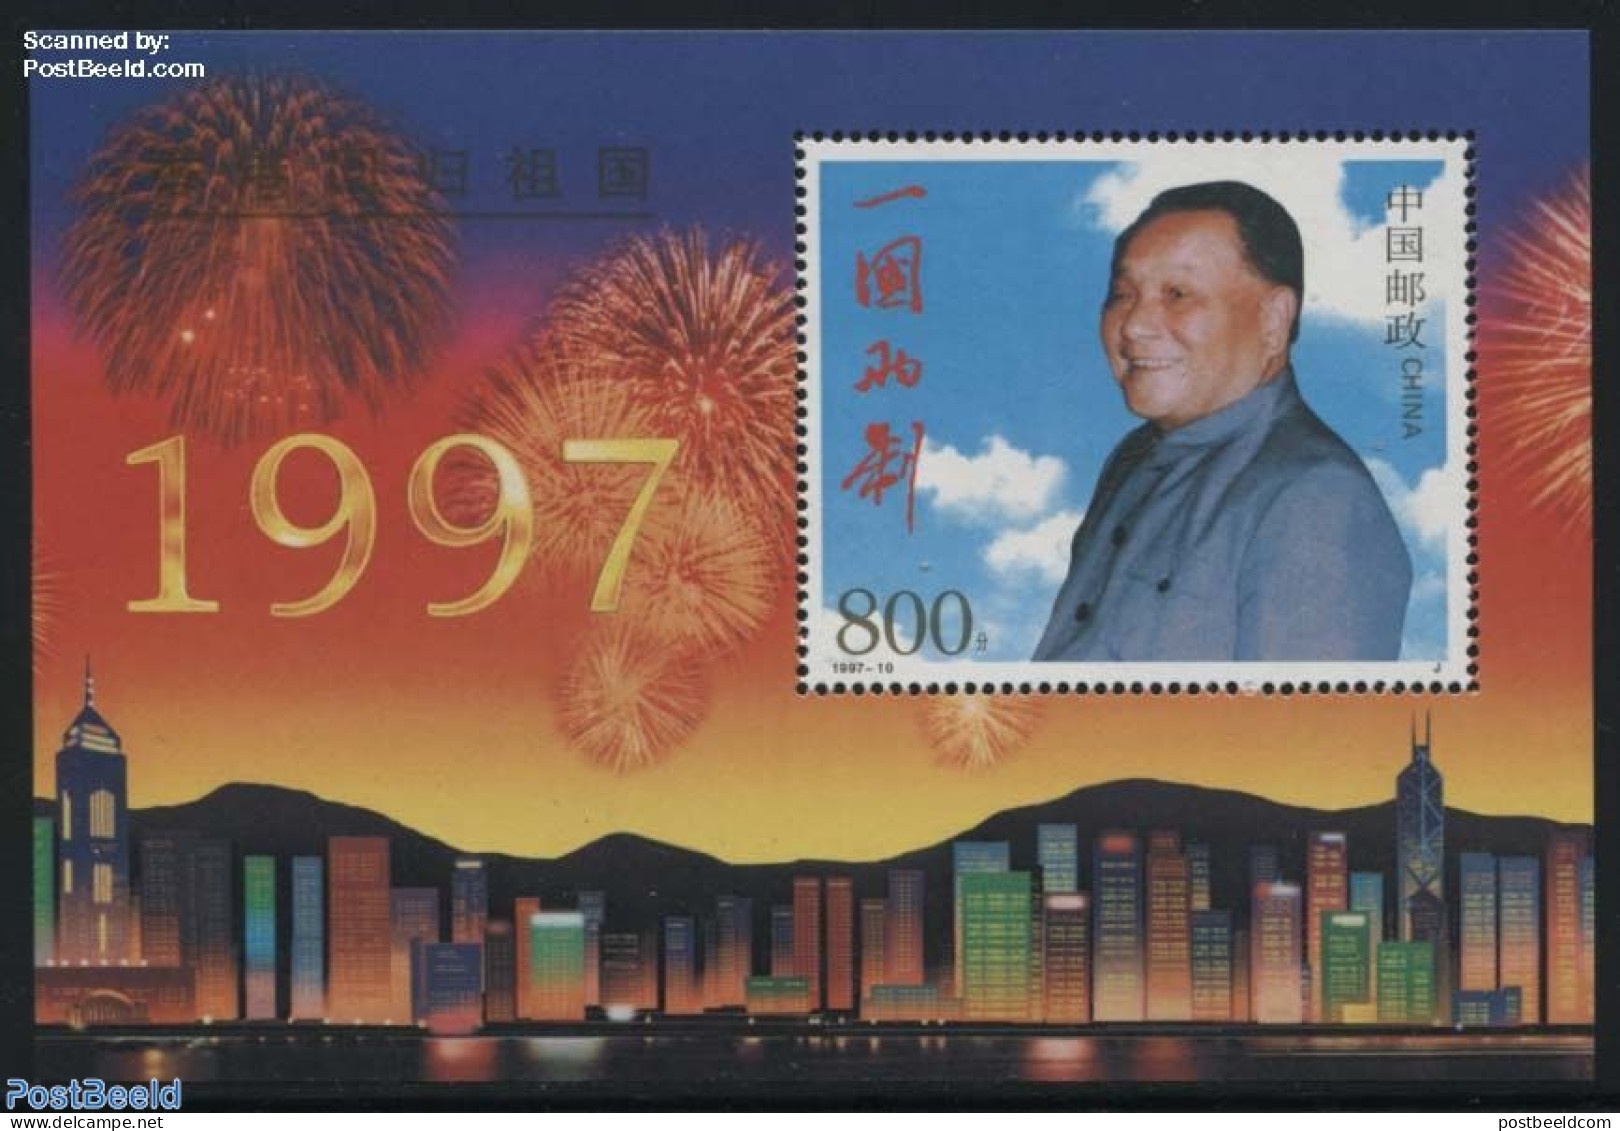 China People’s Republic 1997 Hong Kong To China S/s, Mint NH, Art - Fireworks - Unused Stamps